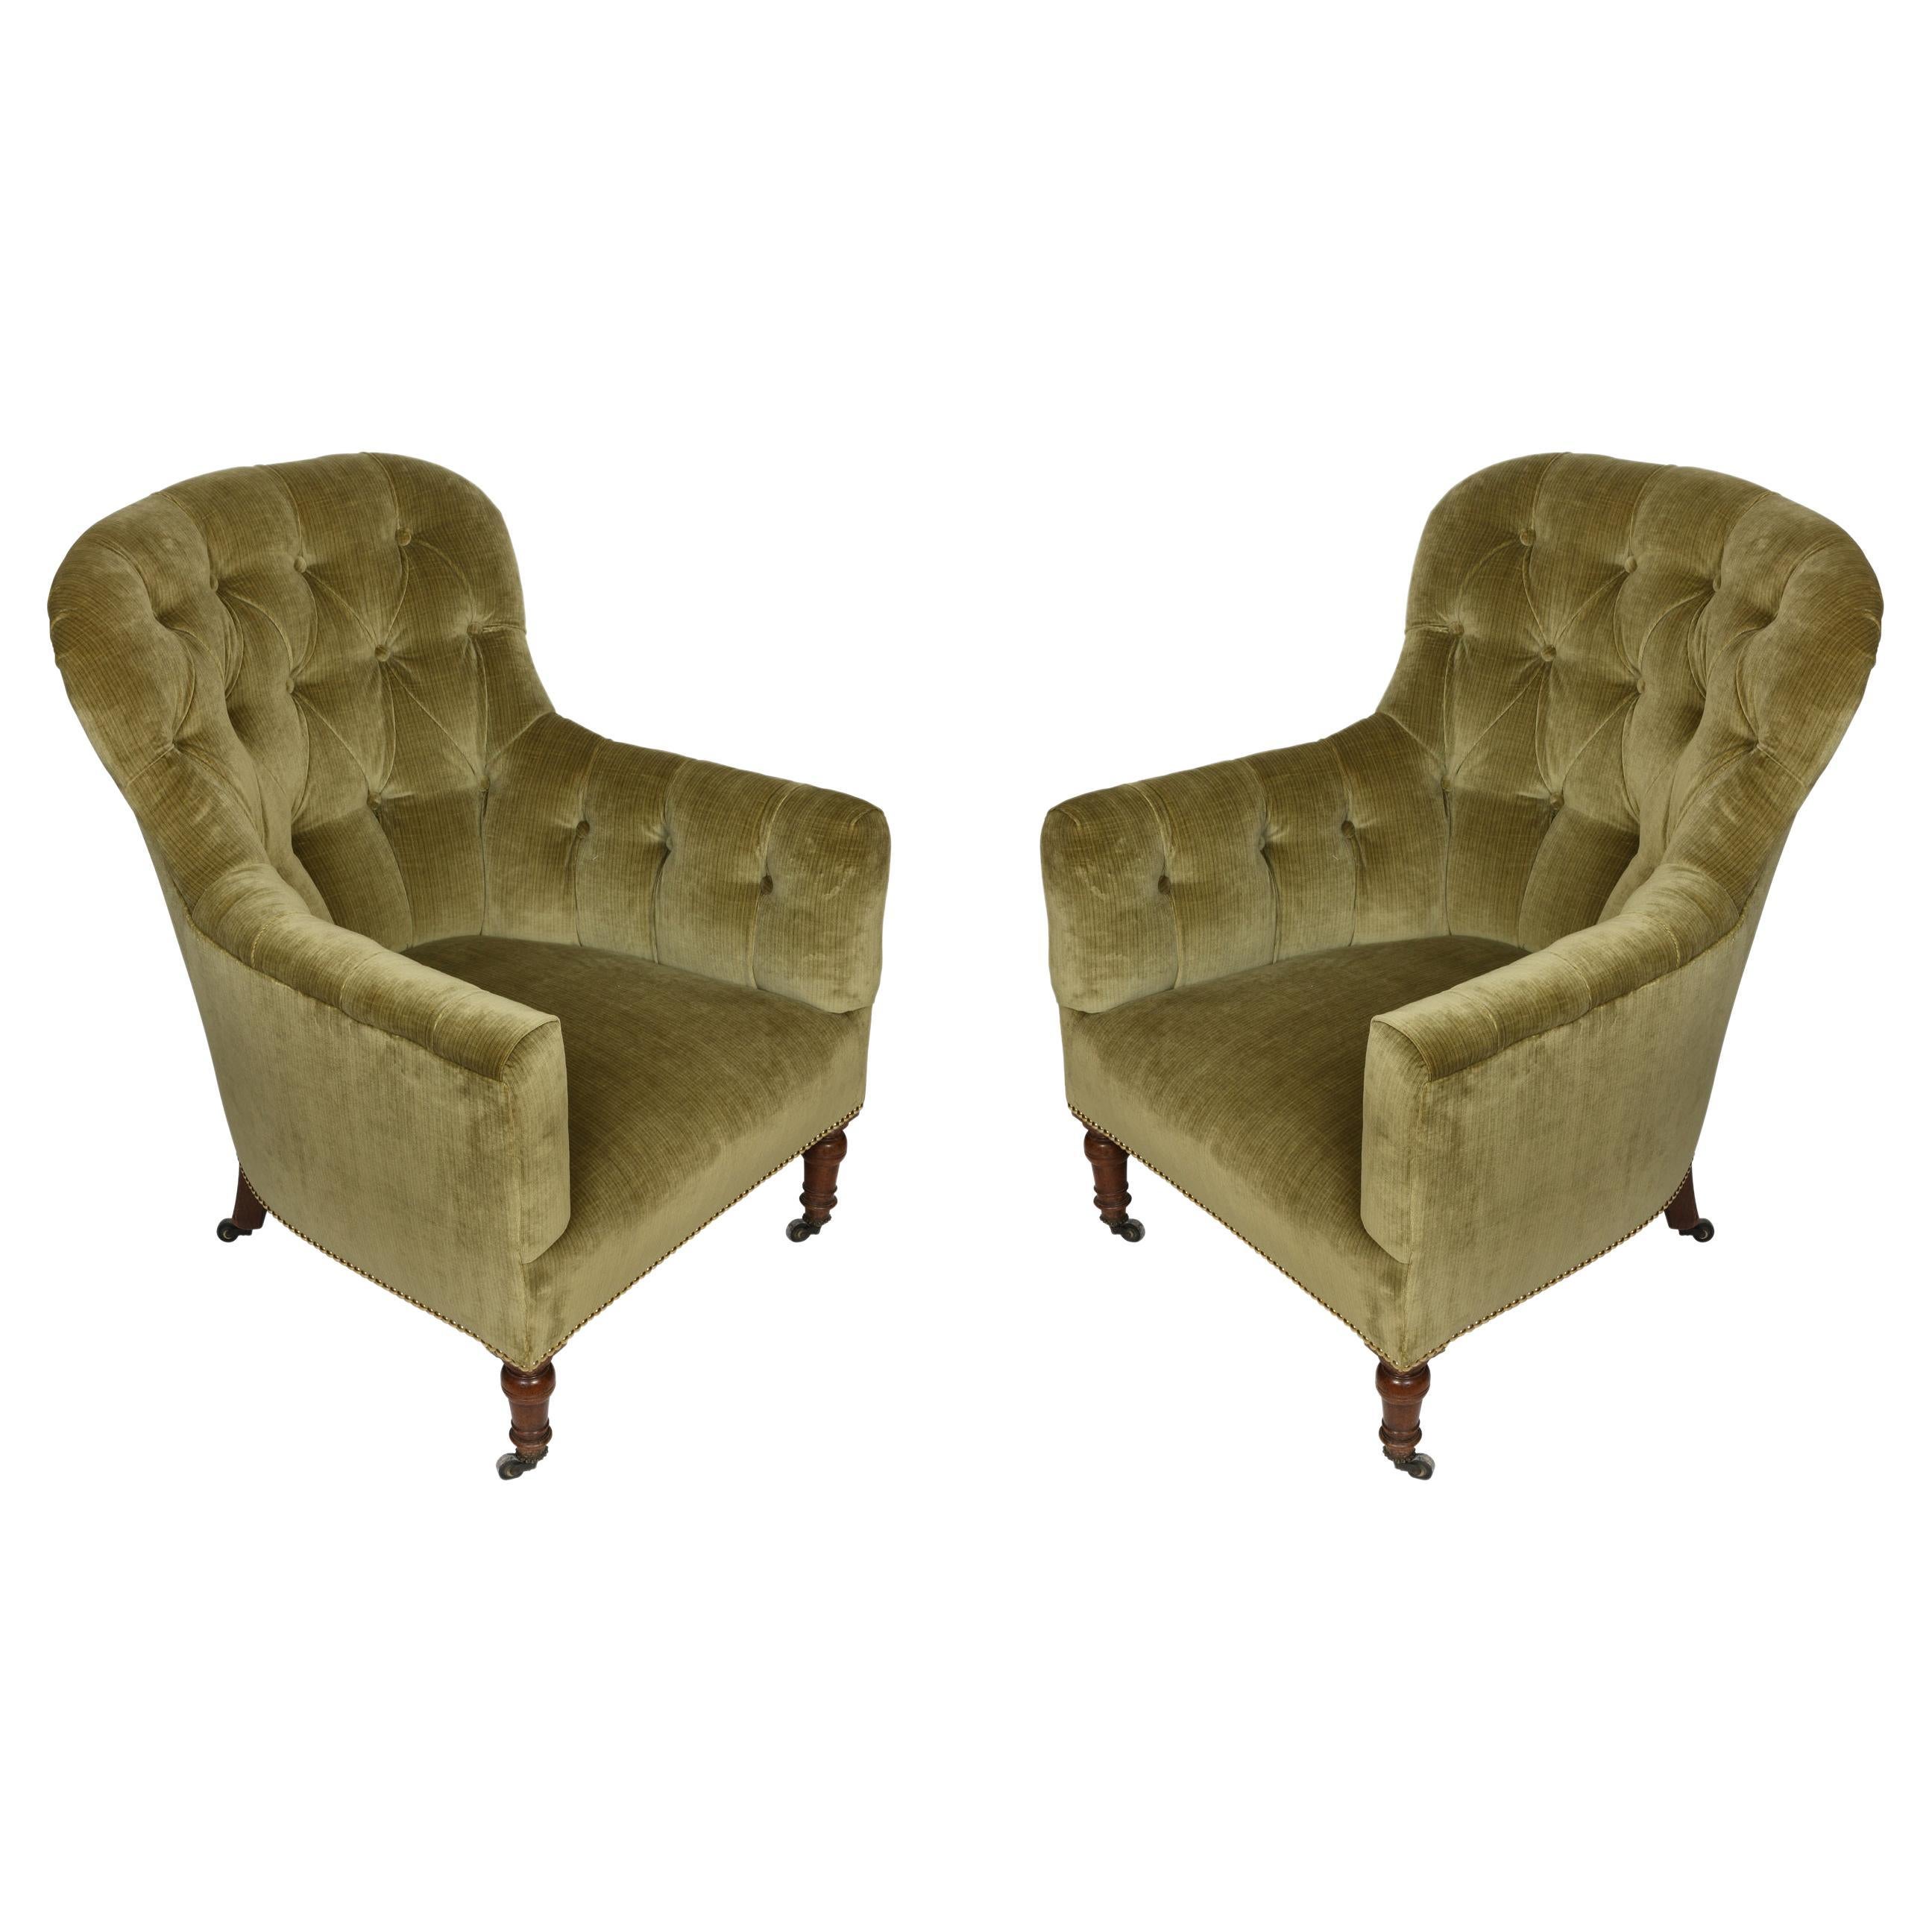 Pair of Rounded Back Tufted Club Chairs Newly Reupholstered in Green Velvet